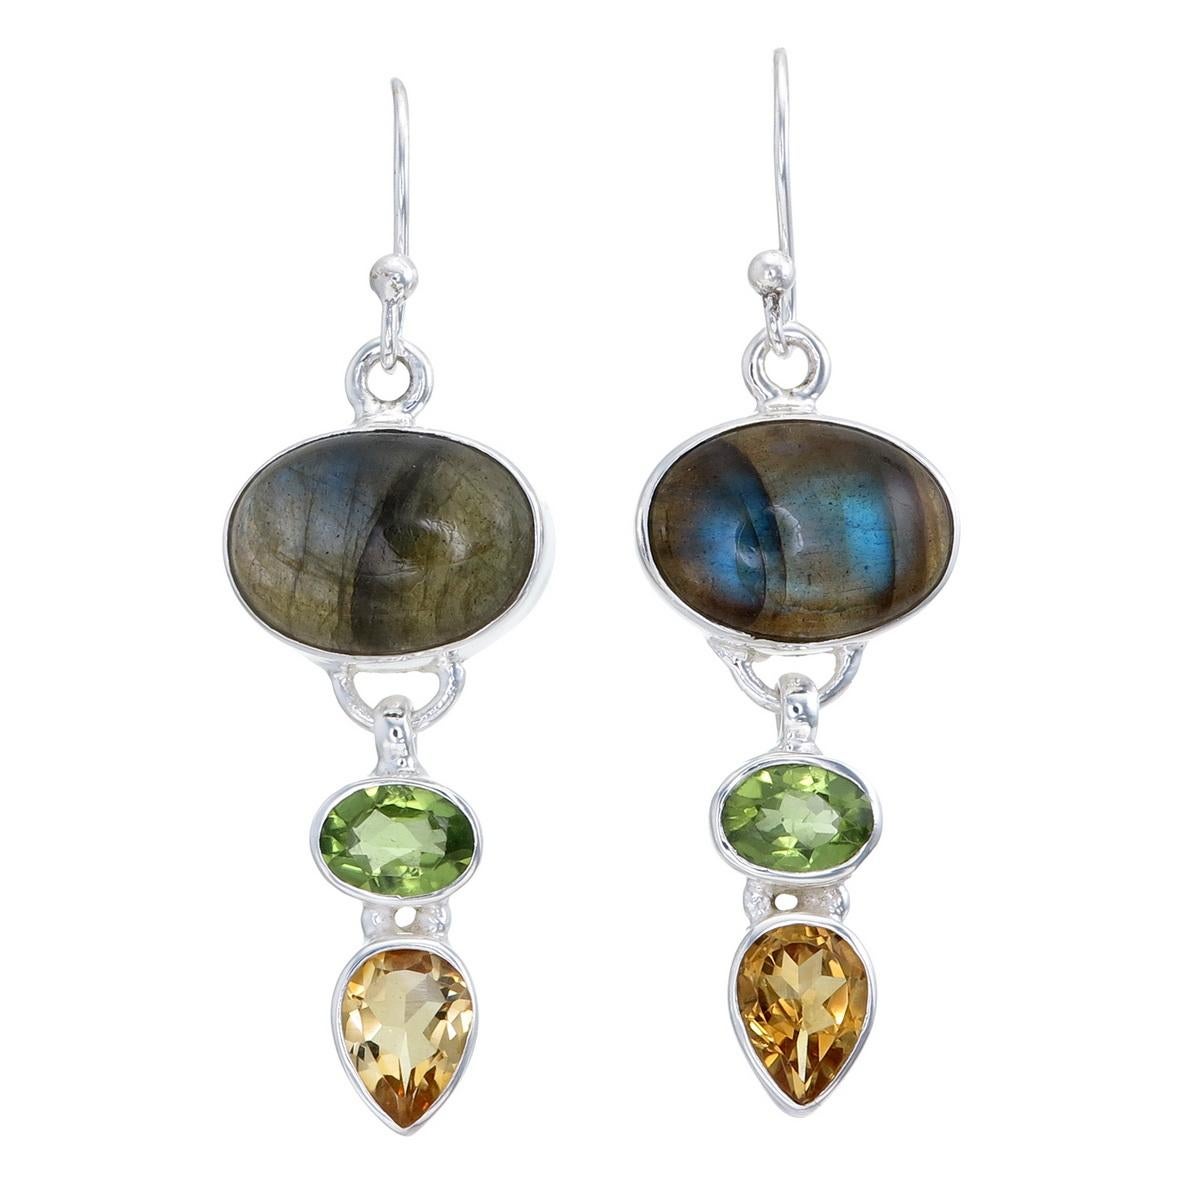 This handcrafted pair of sterling silver earrings showcases a harmonious blend of gemstones. The iridescent labradorite on top displays mesmerizing shades of blue and green. In the middle, the oval peridot adds a vivid green contrast, while the